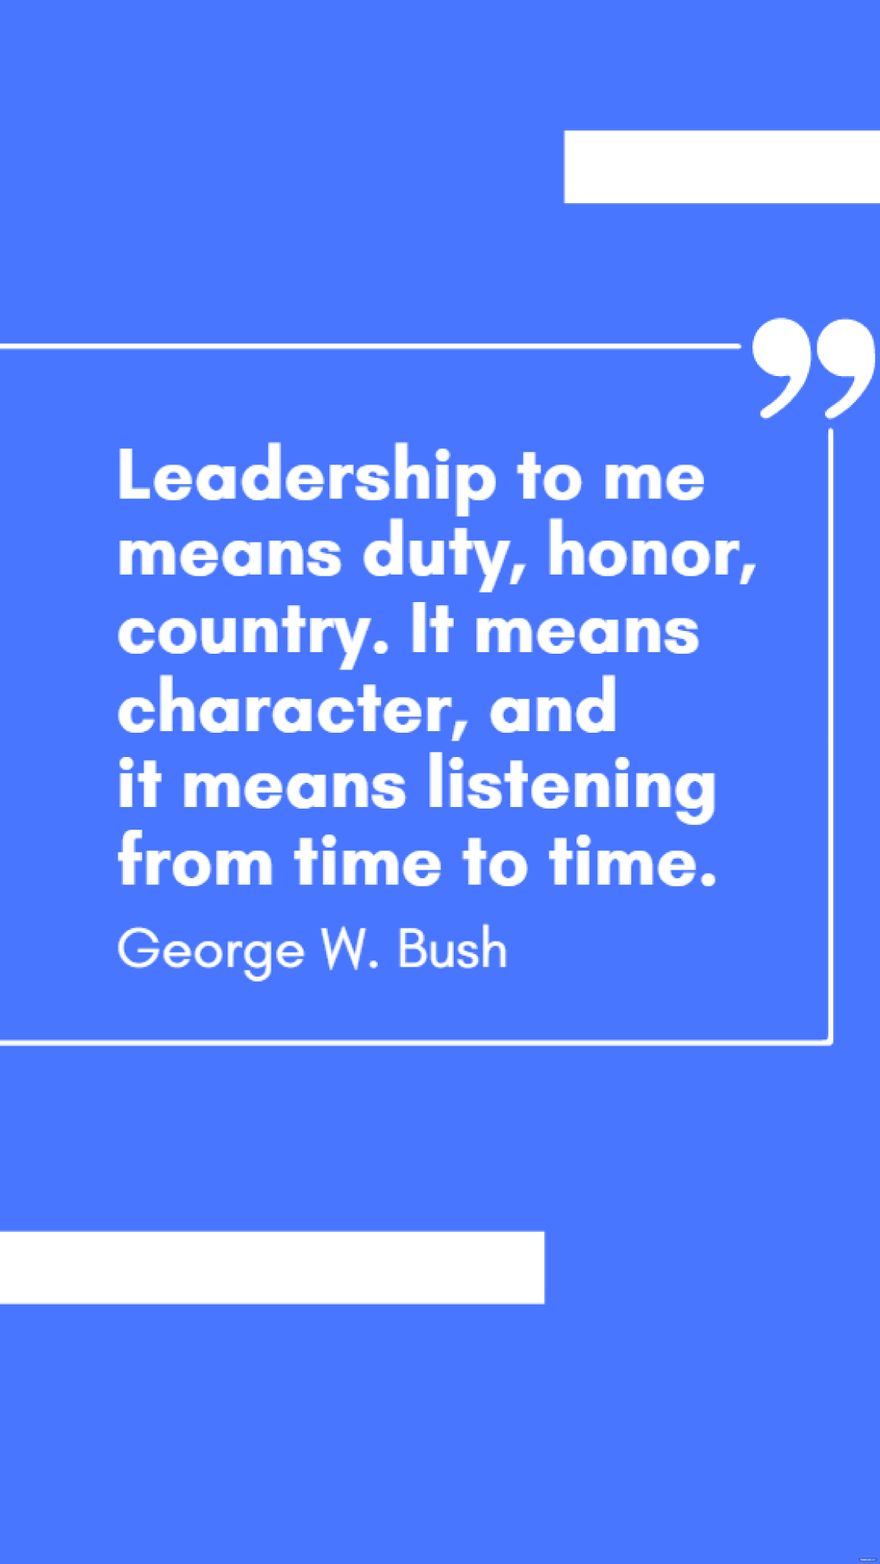 George W. Bush - Leadership to me means duty, honor, country. It means character, and it means listening from time to time.